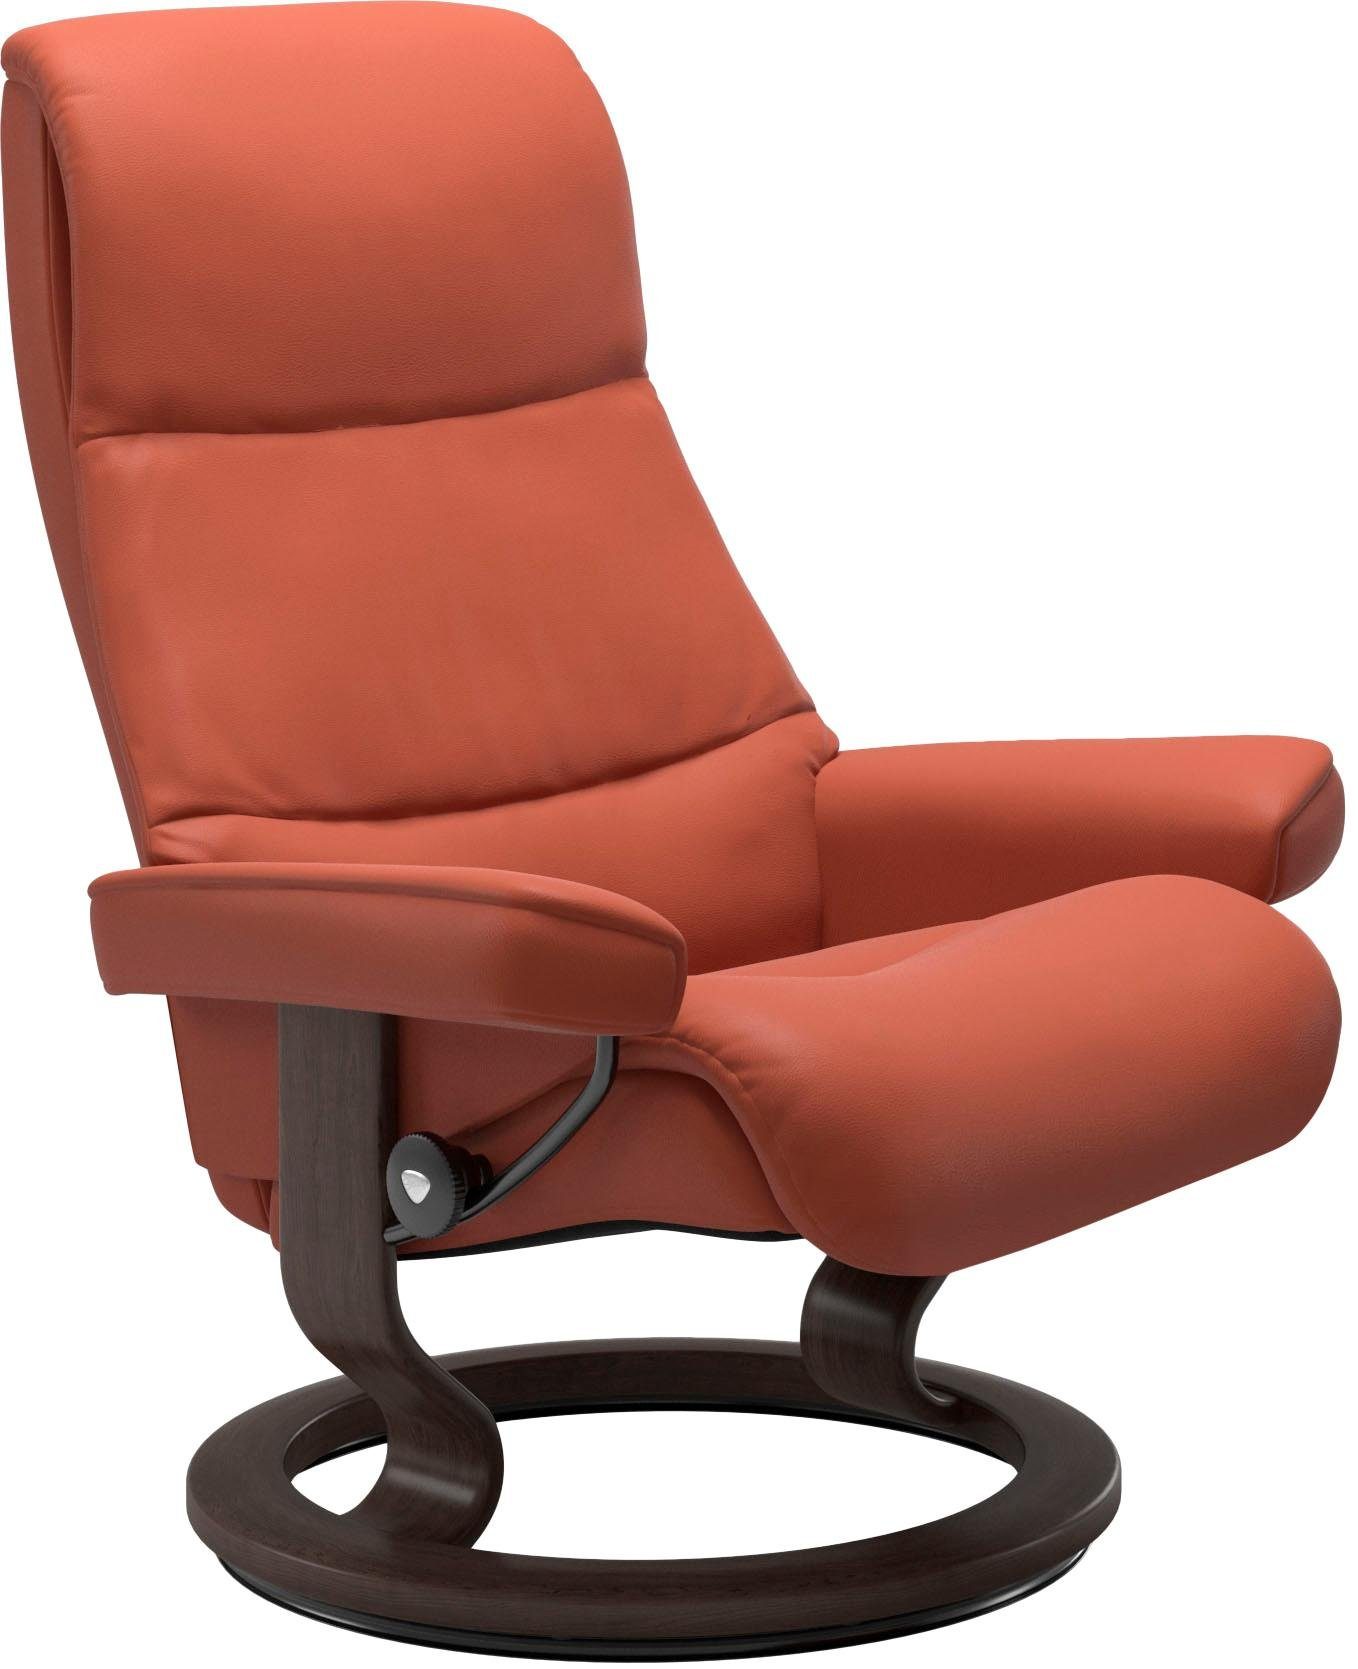 Stressless® Relaxsessel Wenge View, Base, Classic mit S,Gestell Größe